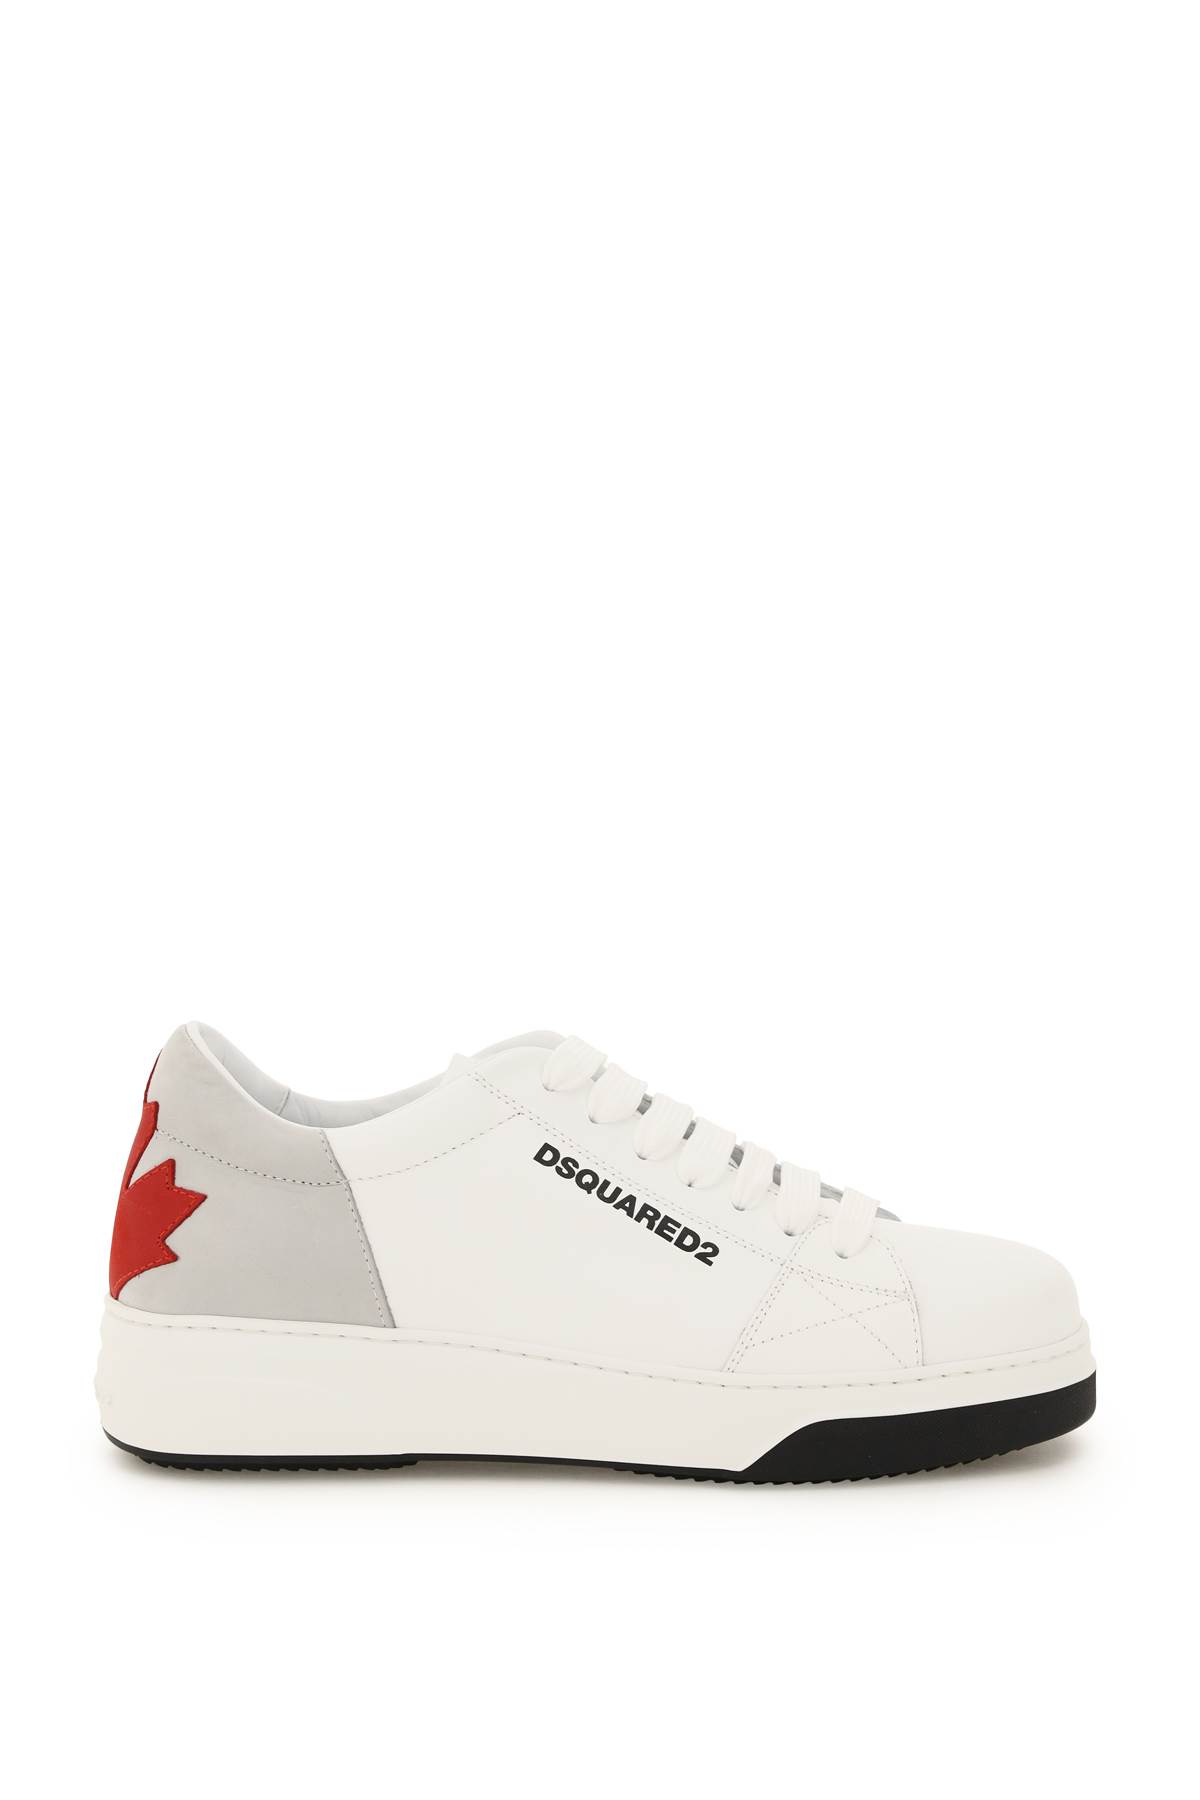 Dsquared2 Bumper Leather Sneakers